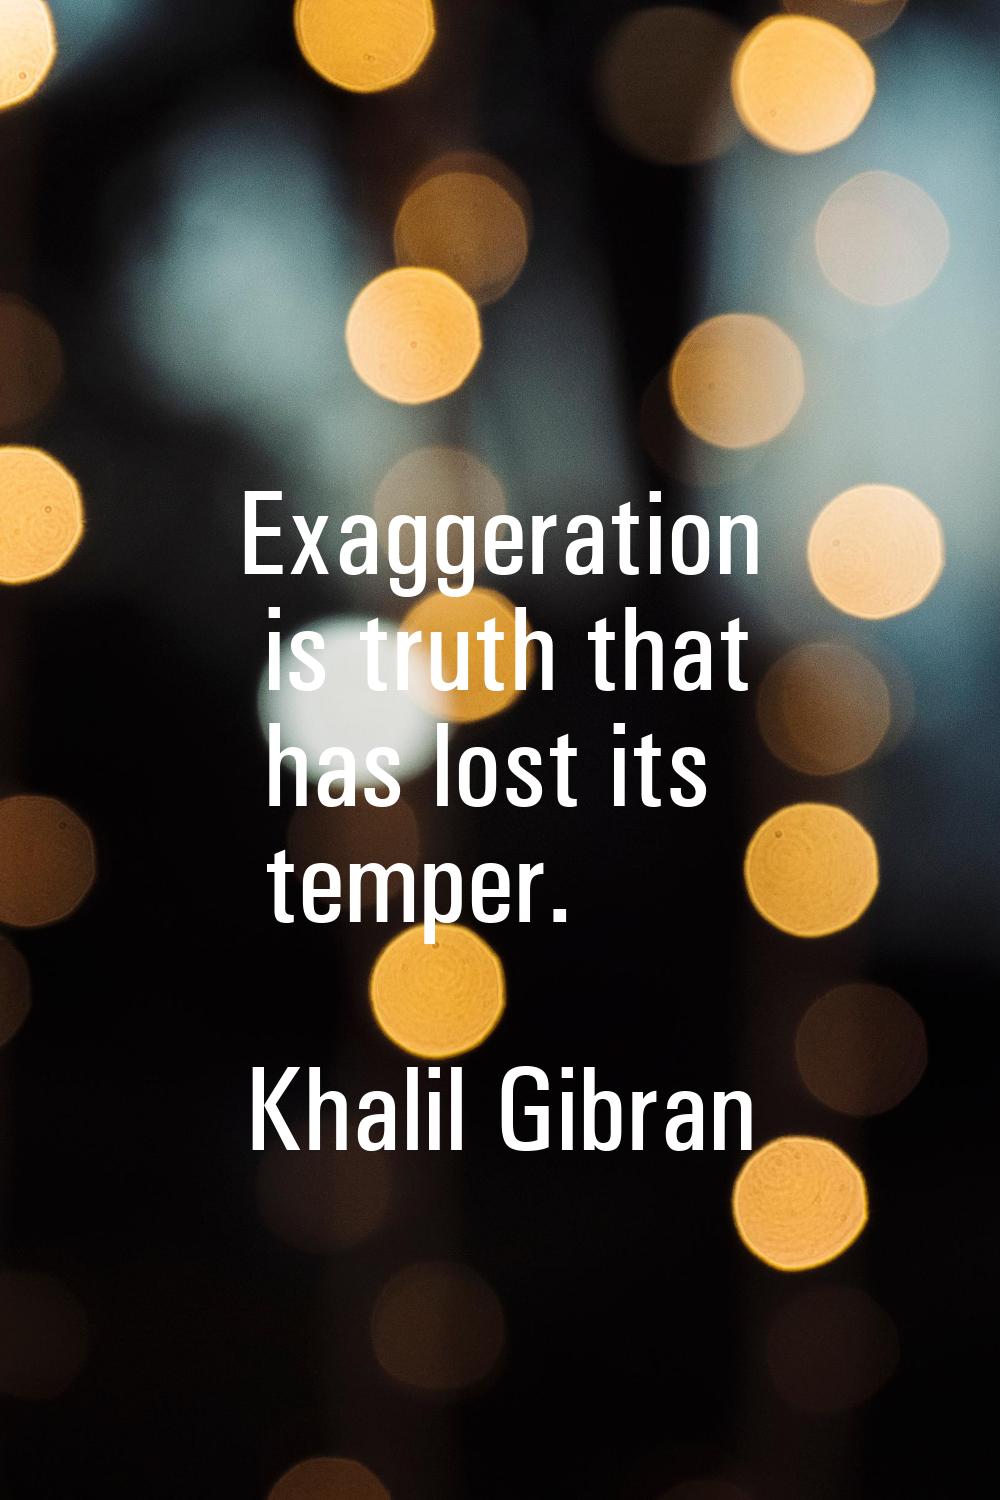 Exaggeration is truth that has lost its temper.